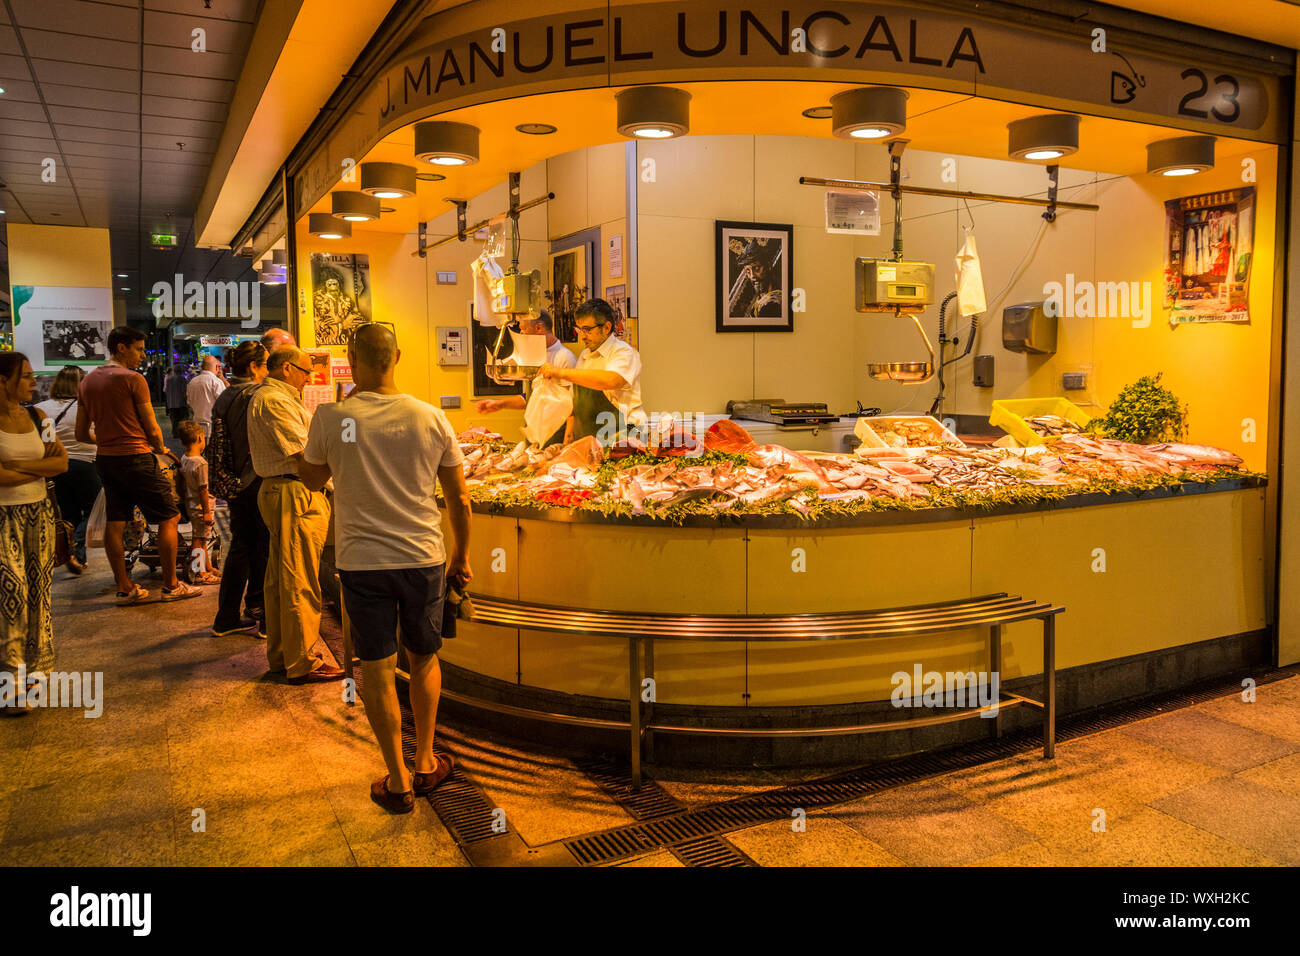 A grocery store in the city of Seville, Spain Stock Photo